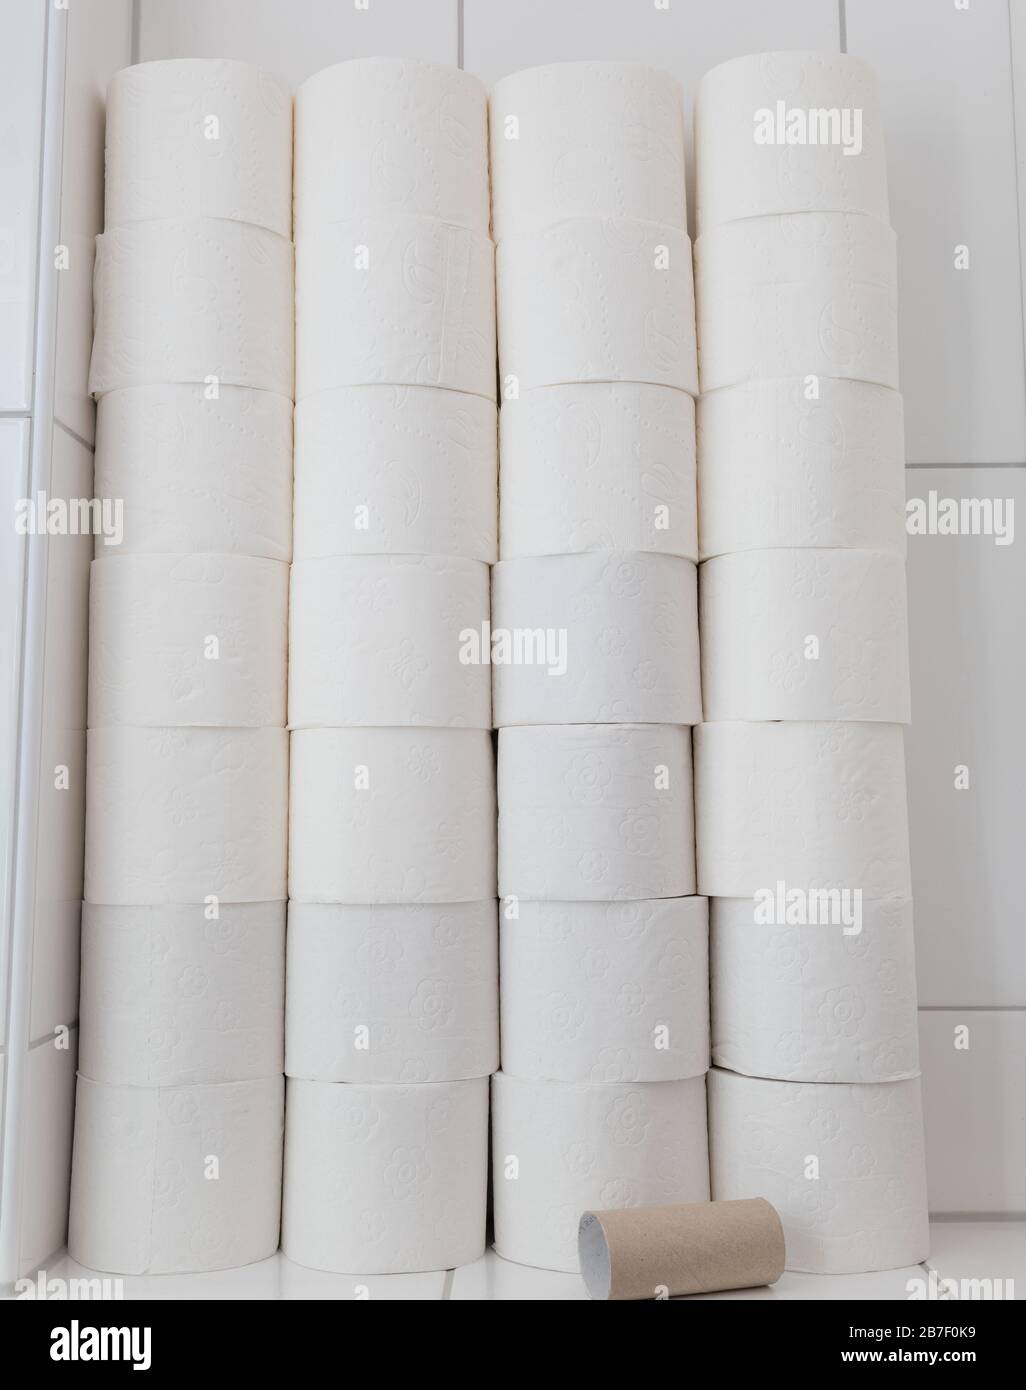 Closeup of white rolls of toilet paper in a bathroom Stock Photo